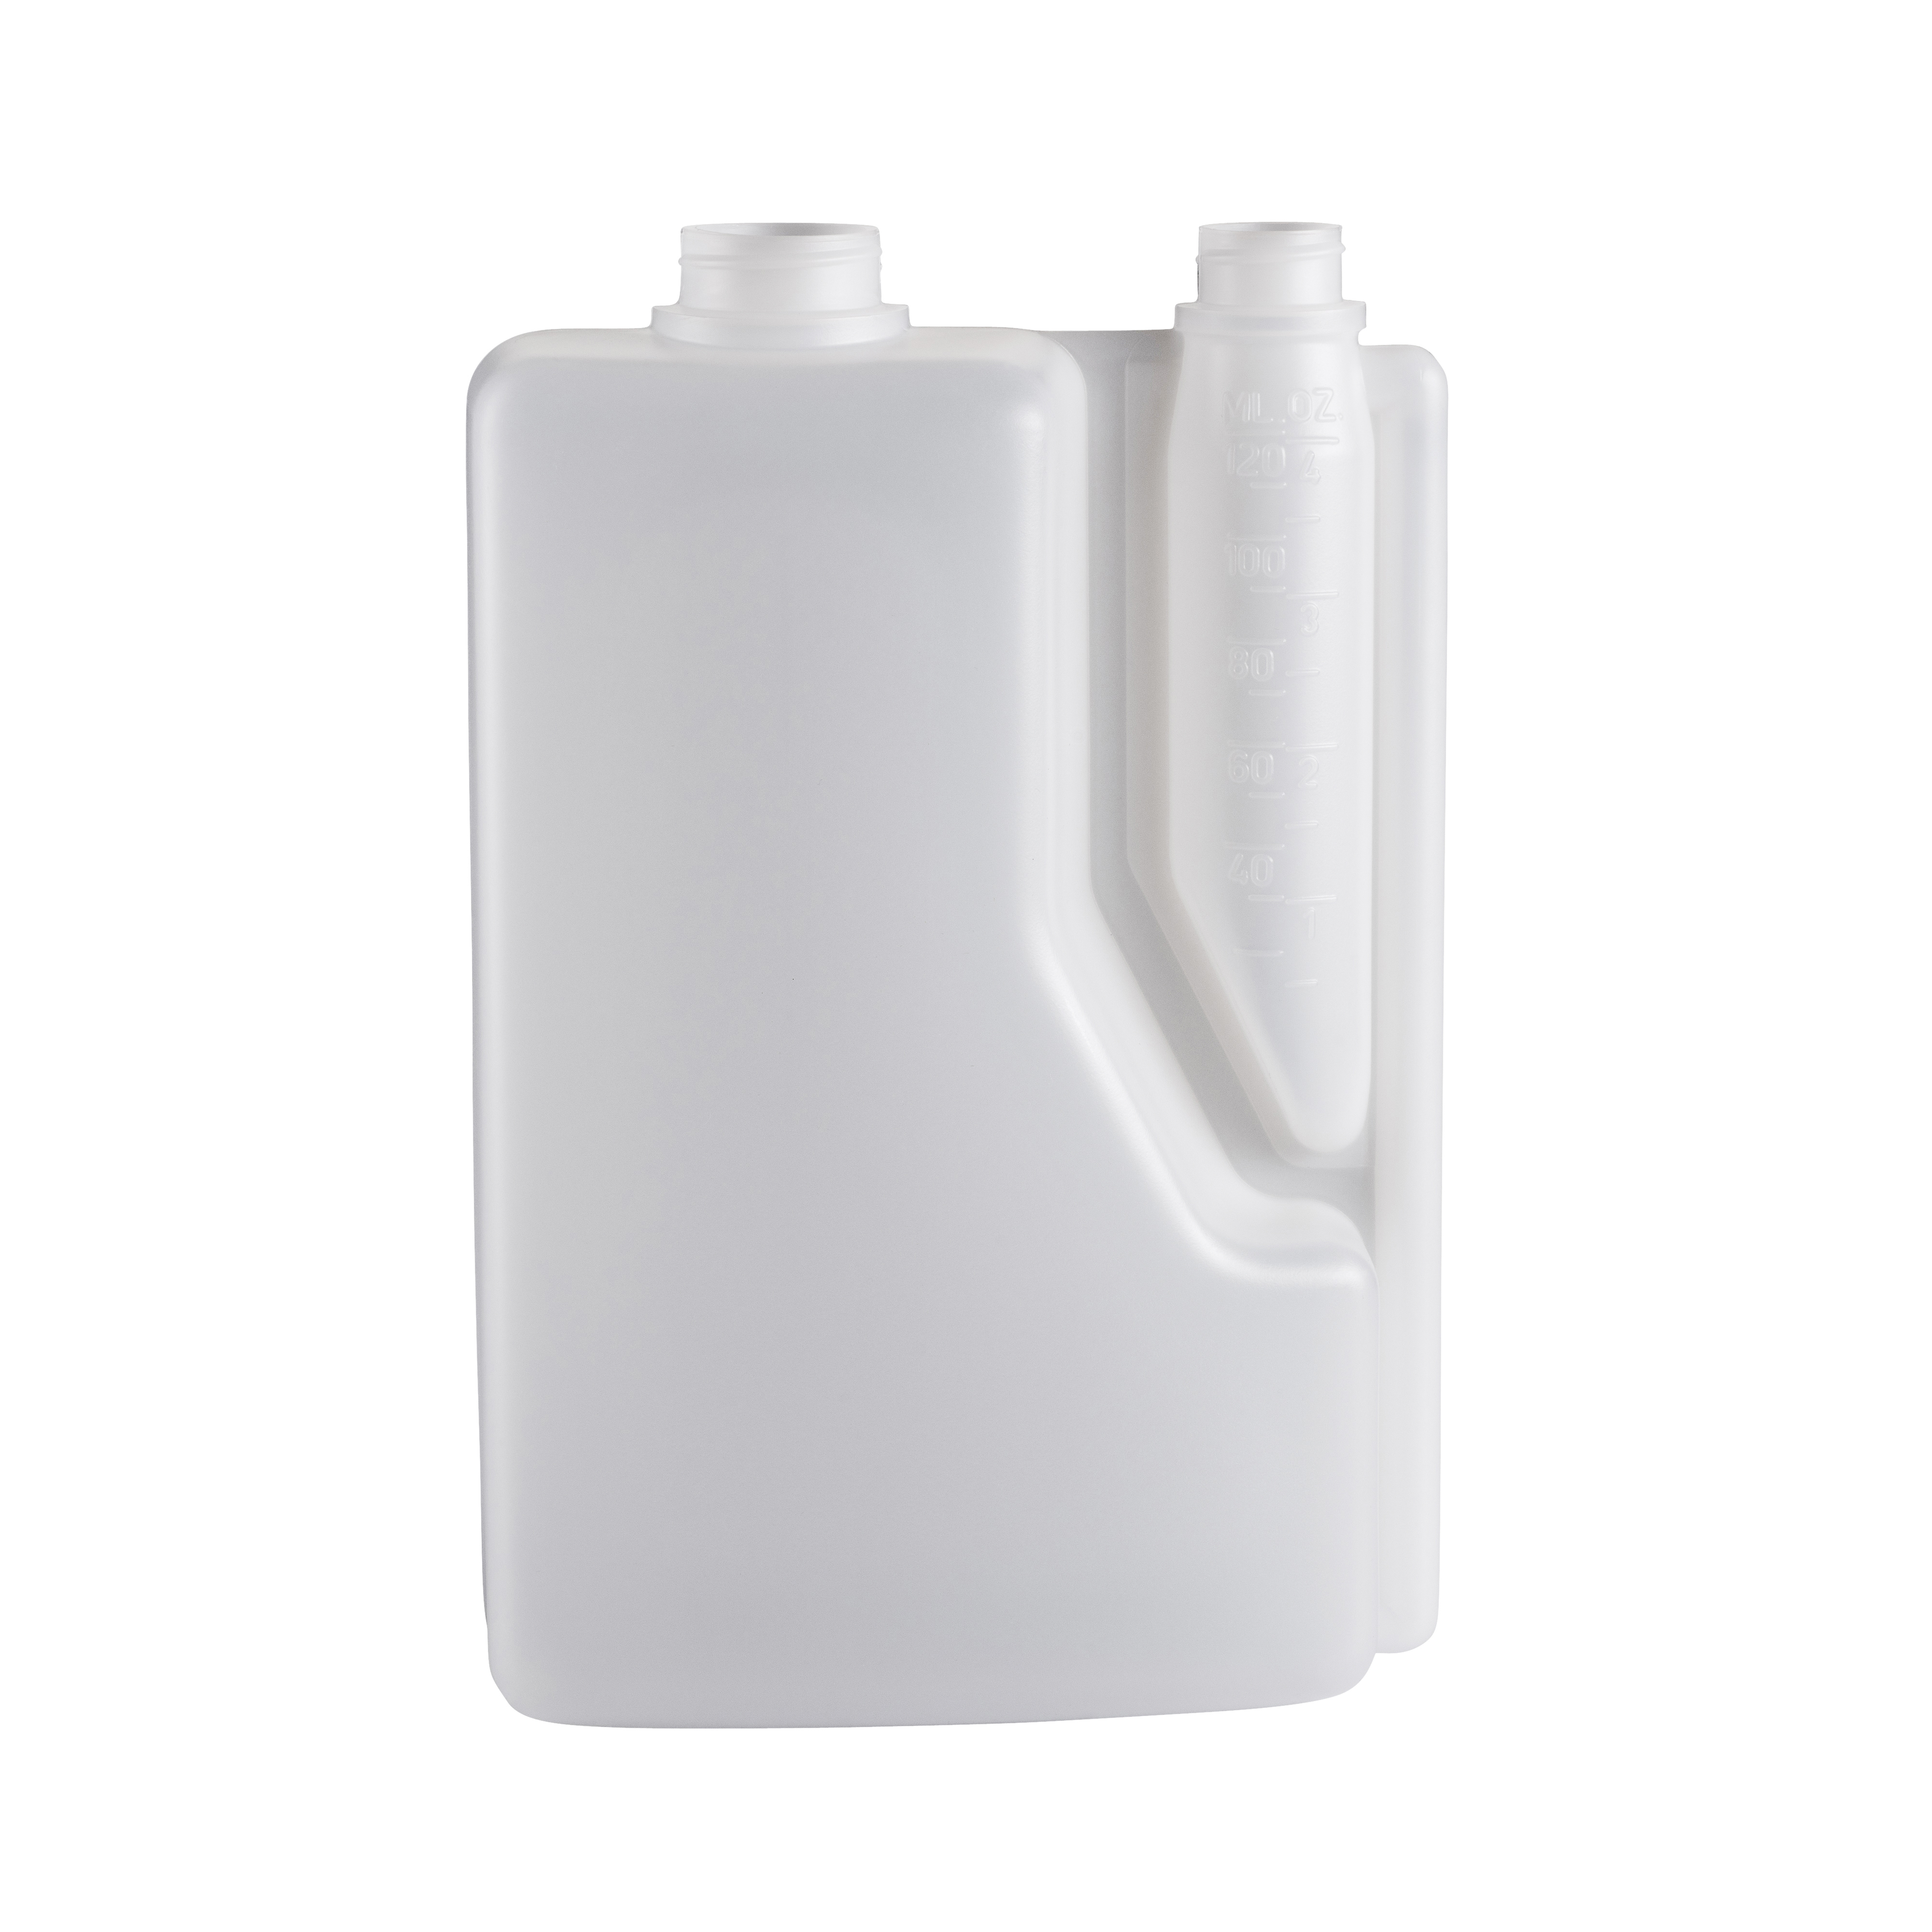 Translucent liquid container with two spouts